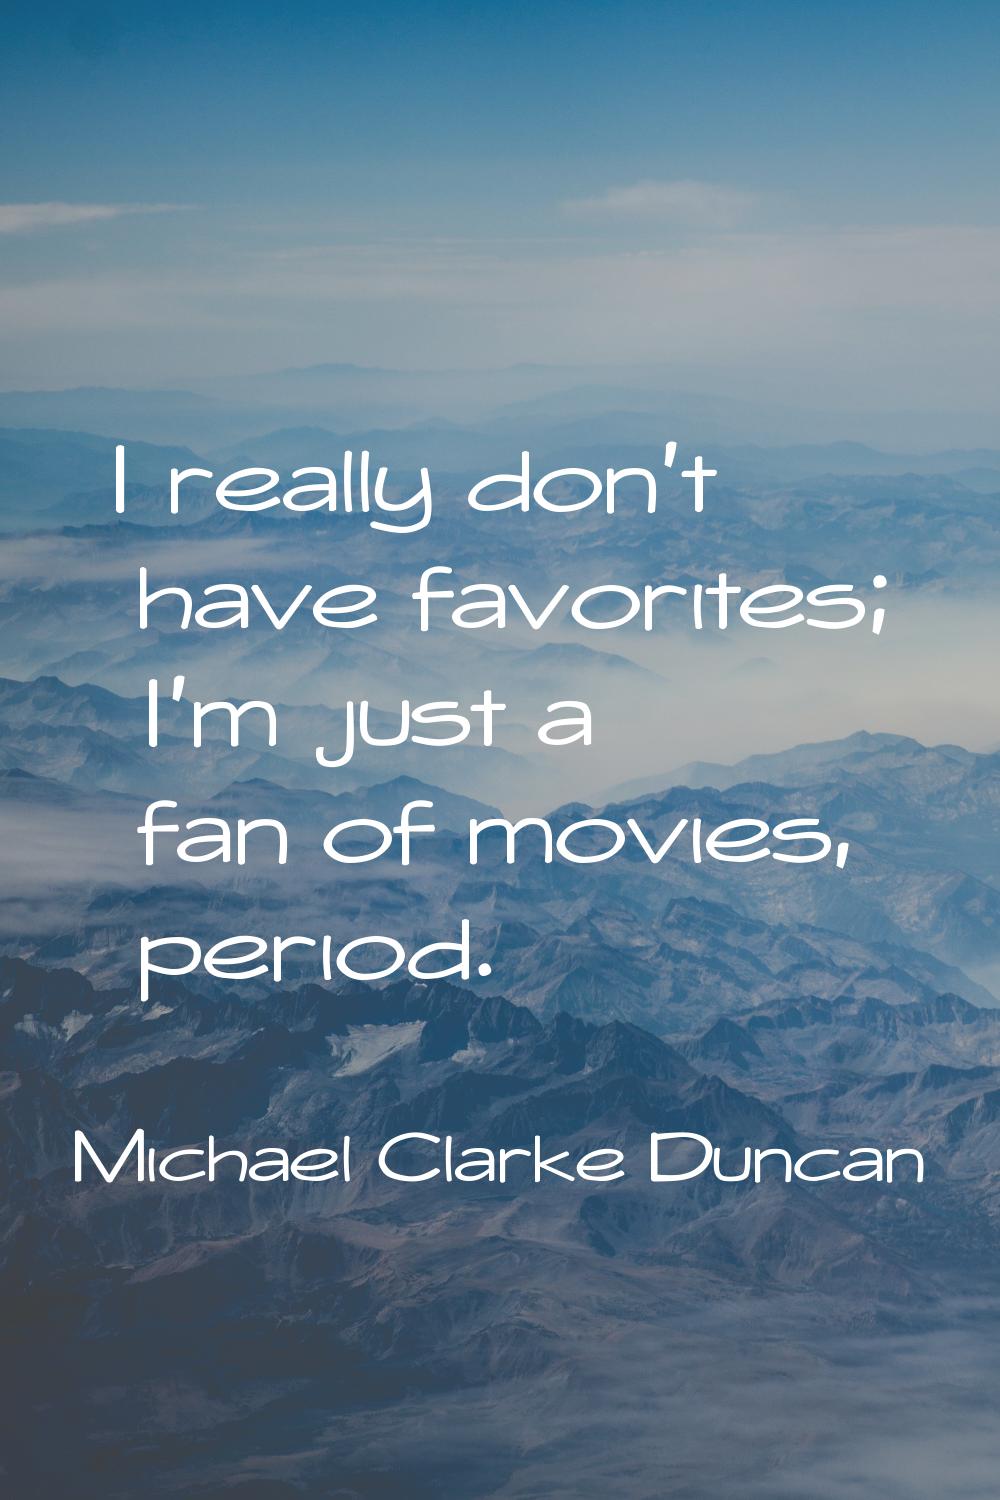 I really don't have favorites; I'm just a fan of movies, period.